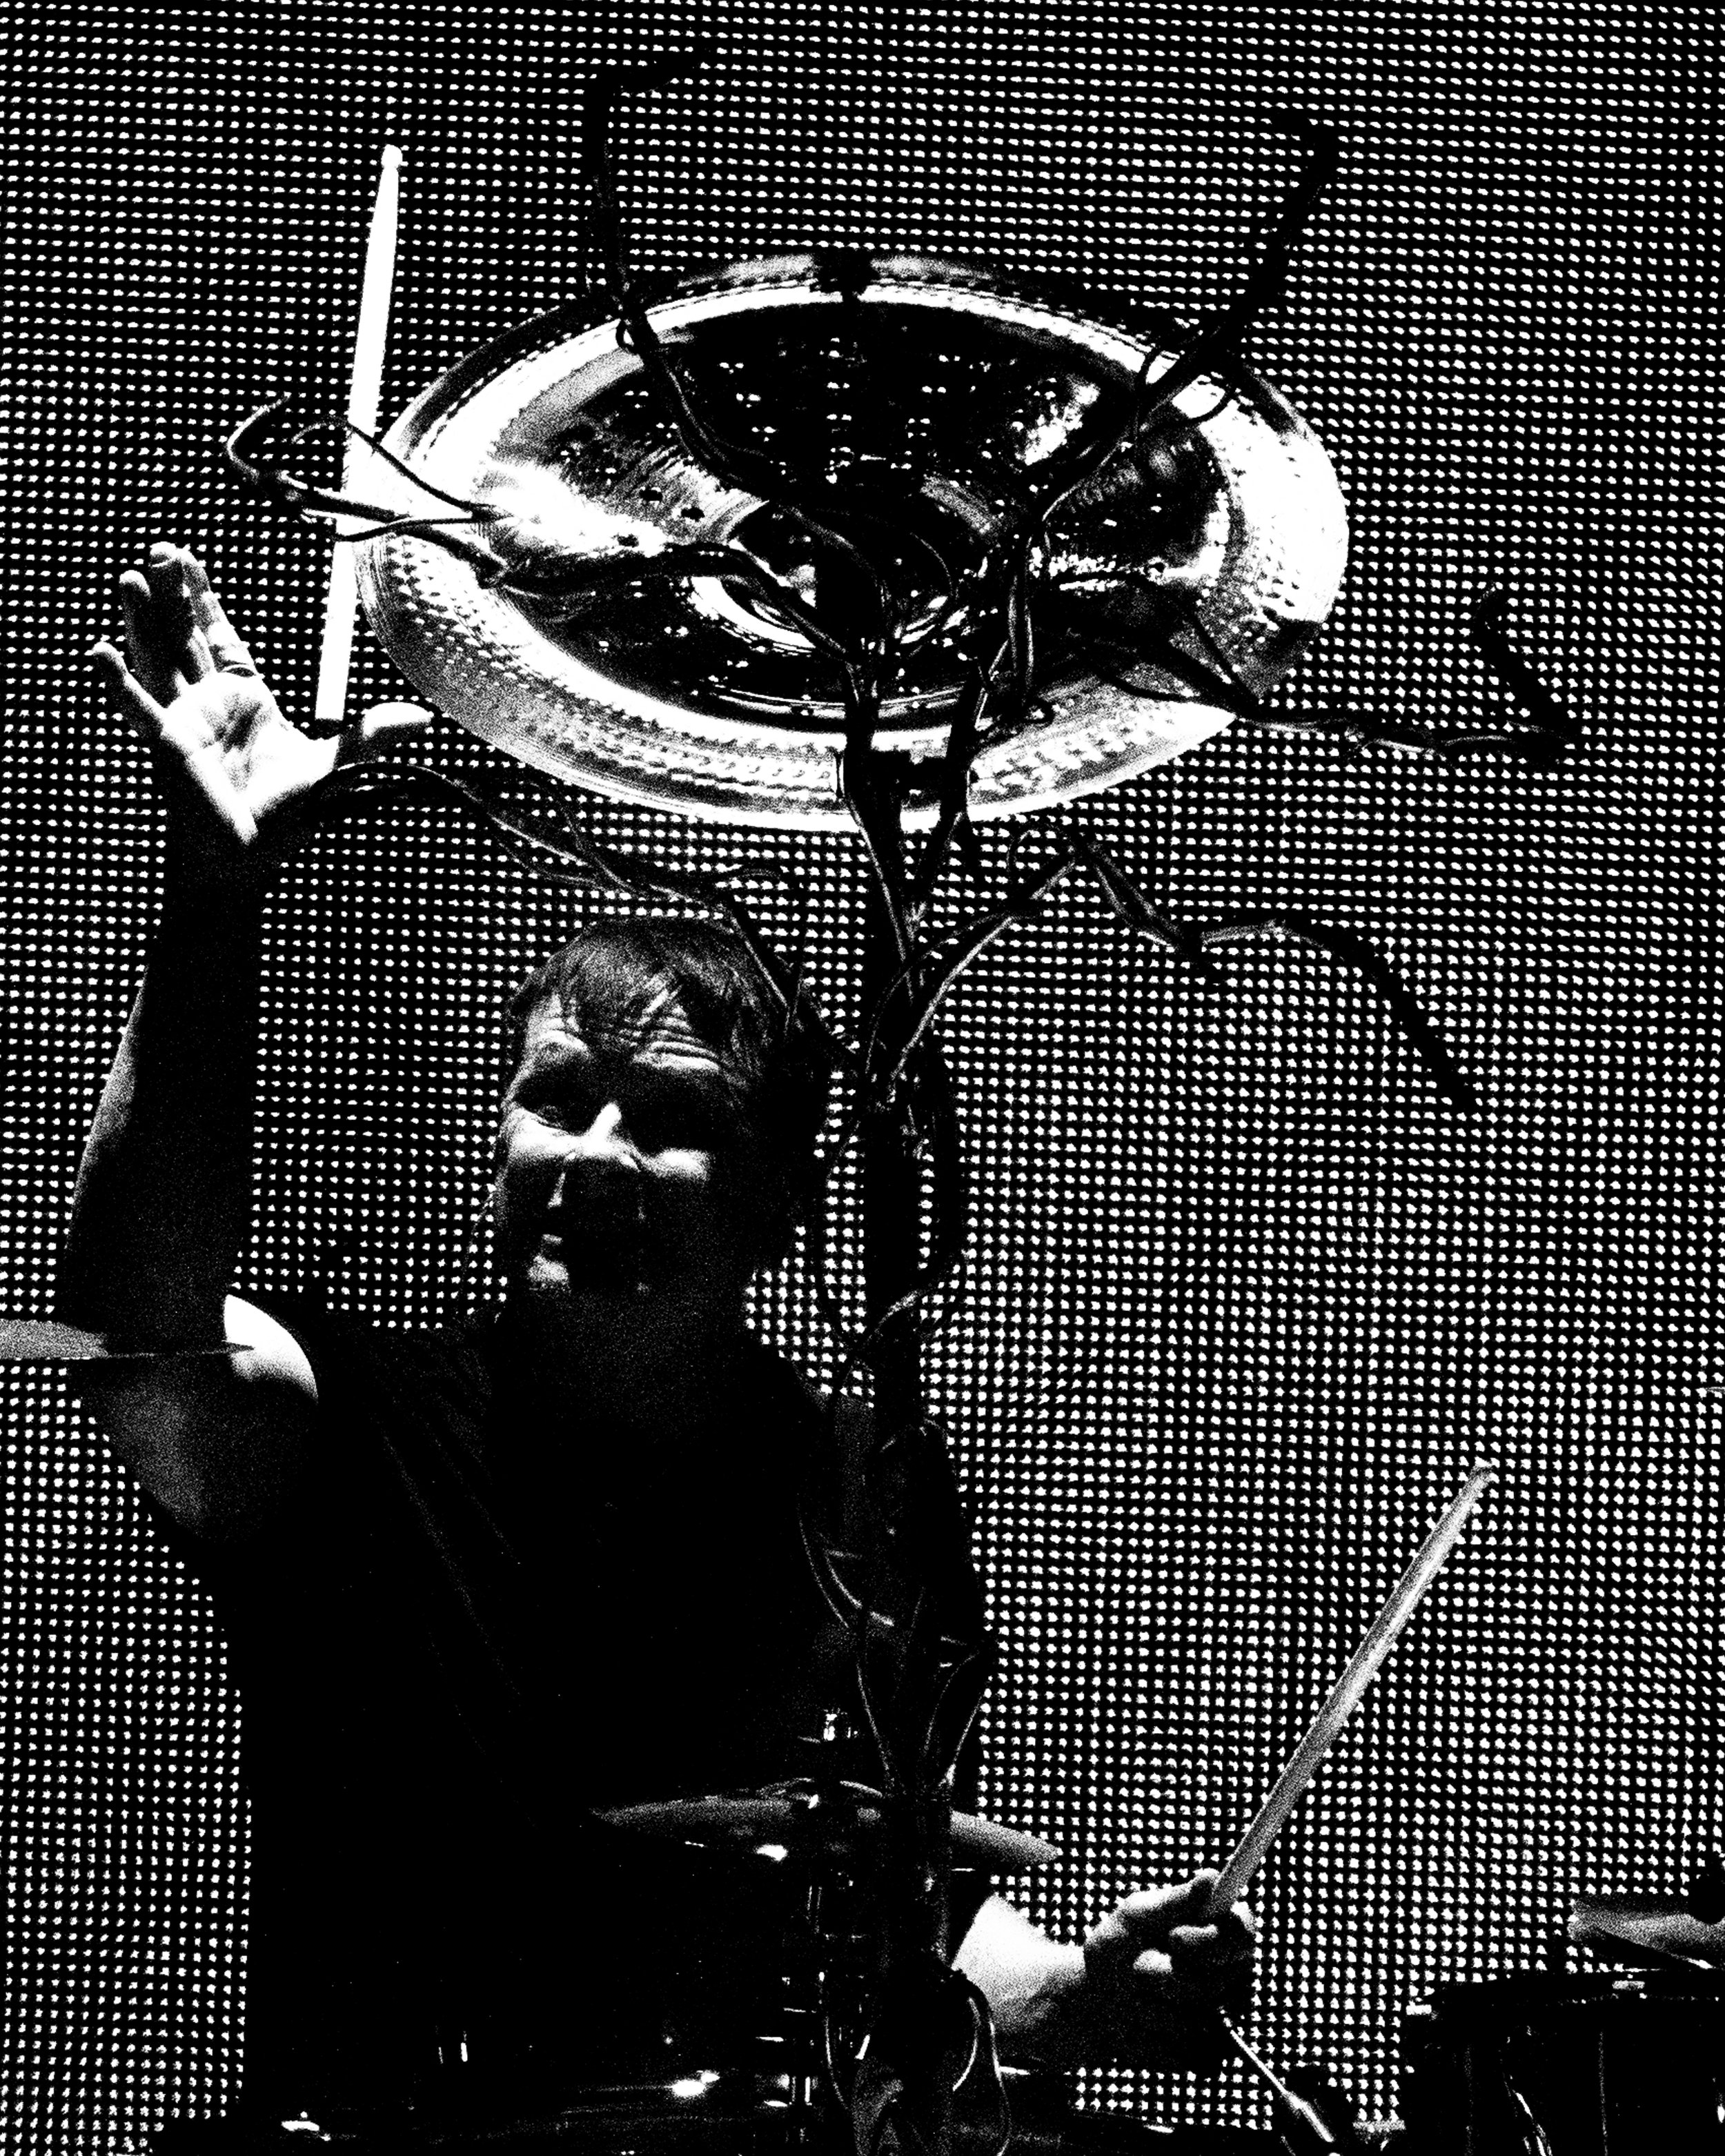 KORN - 2022 NORTH AMERICAN TOUR - Ball Arena - Denver, Colorado - Tuesday, August 16, 2022 - PHOTO BY Mowgli Miles of Interracial Friends - PHOTO BY Mowgli Miles of Interracial Friends-108.JPG